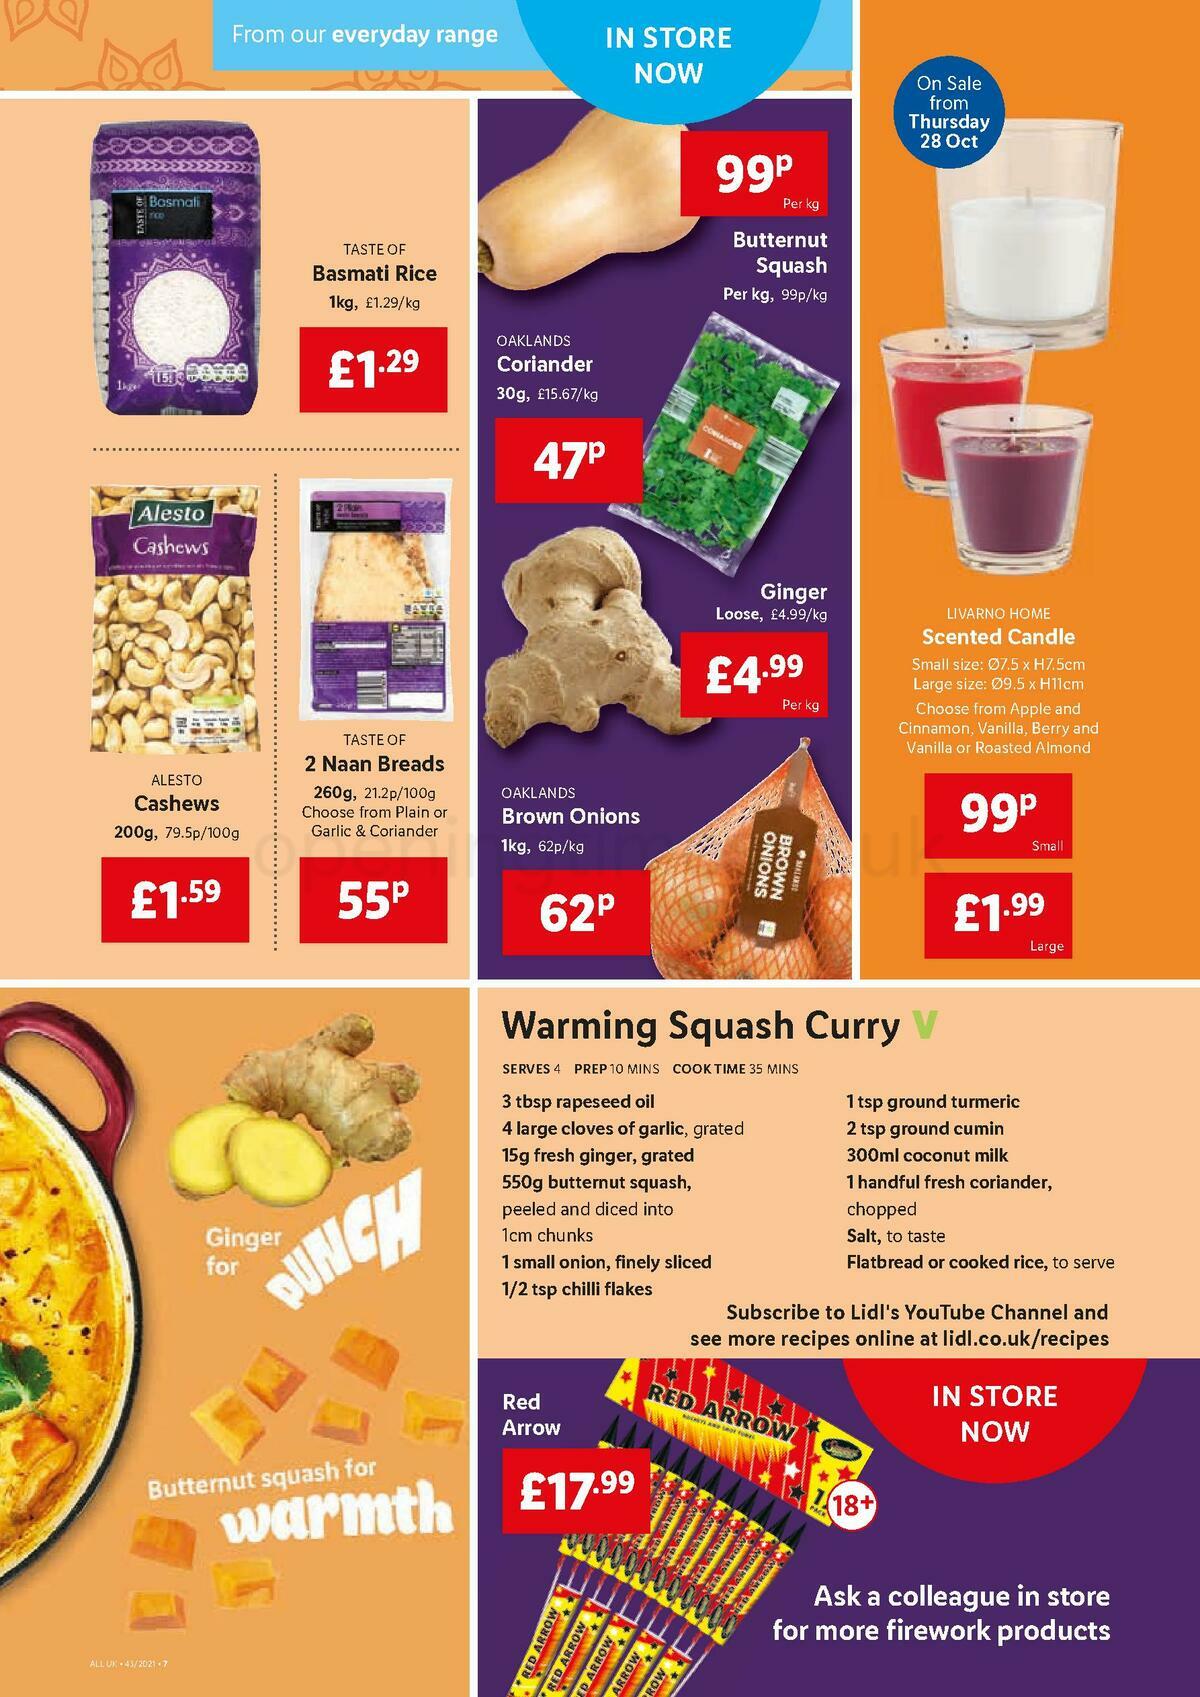 LIDL Offers from 28 October